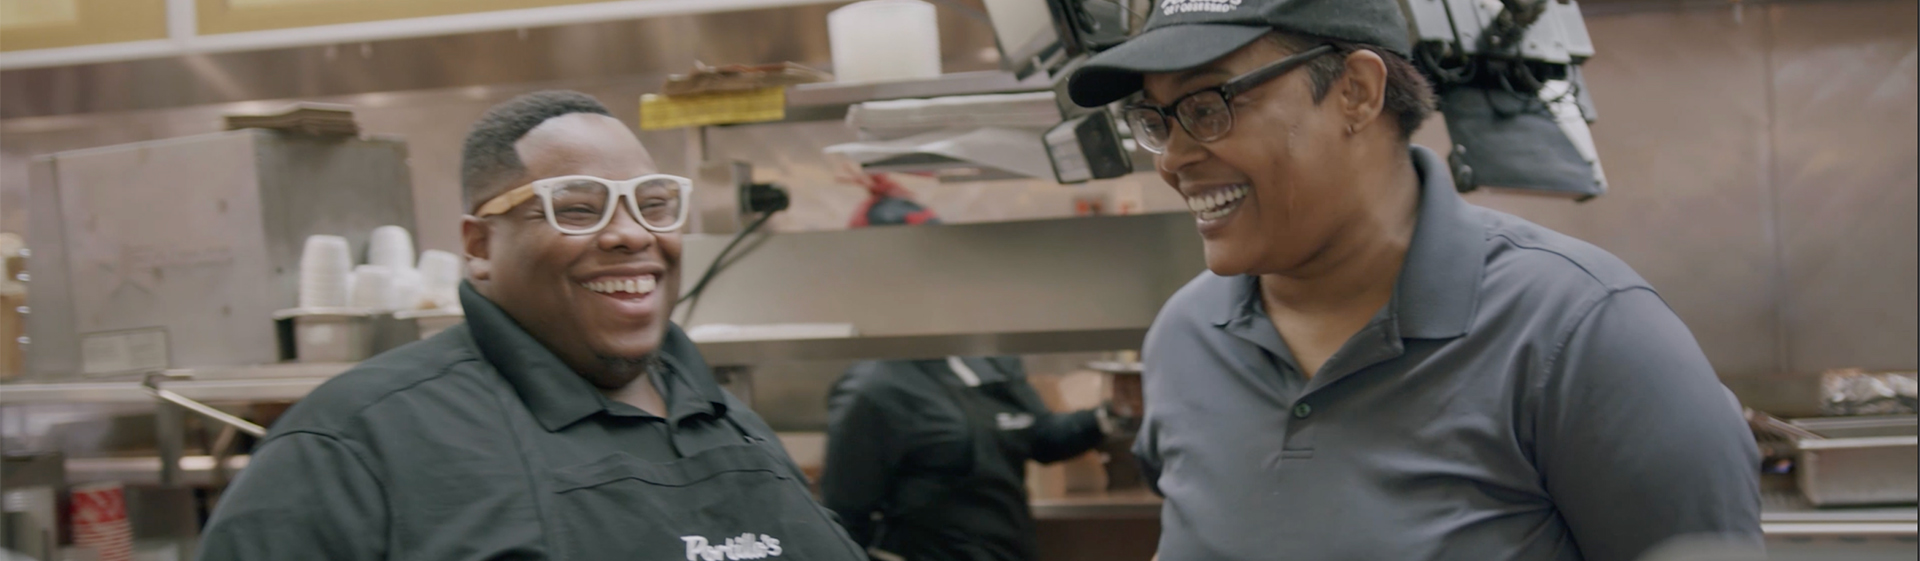 two employees smiling in the kitchen